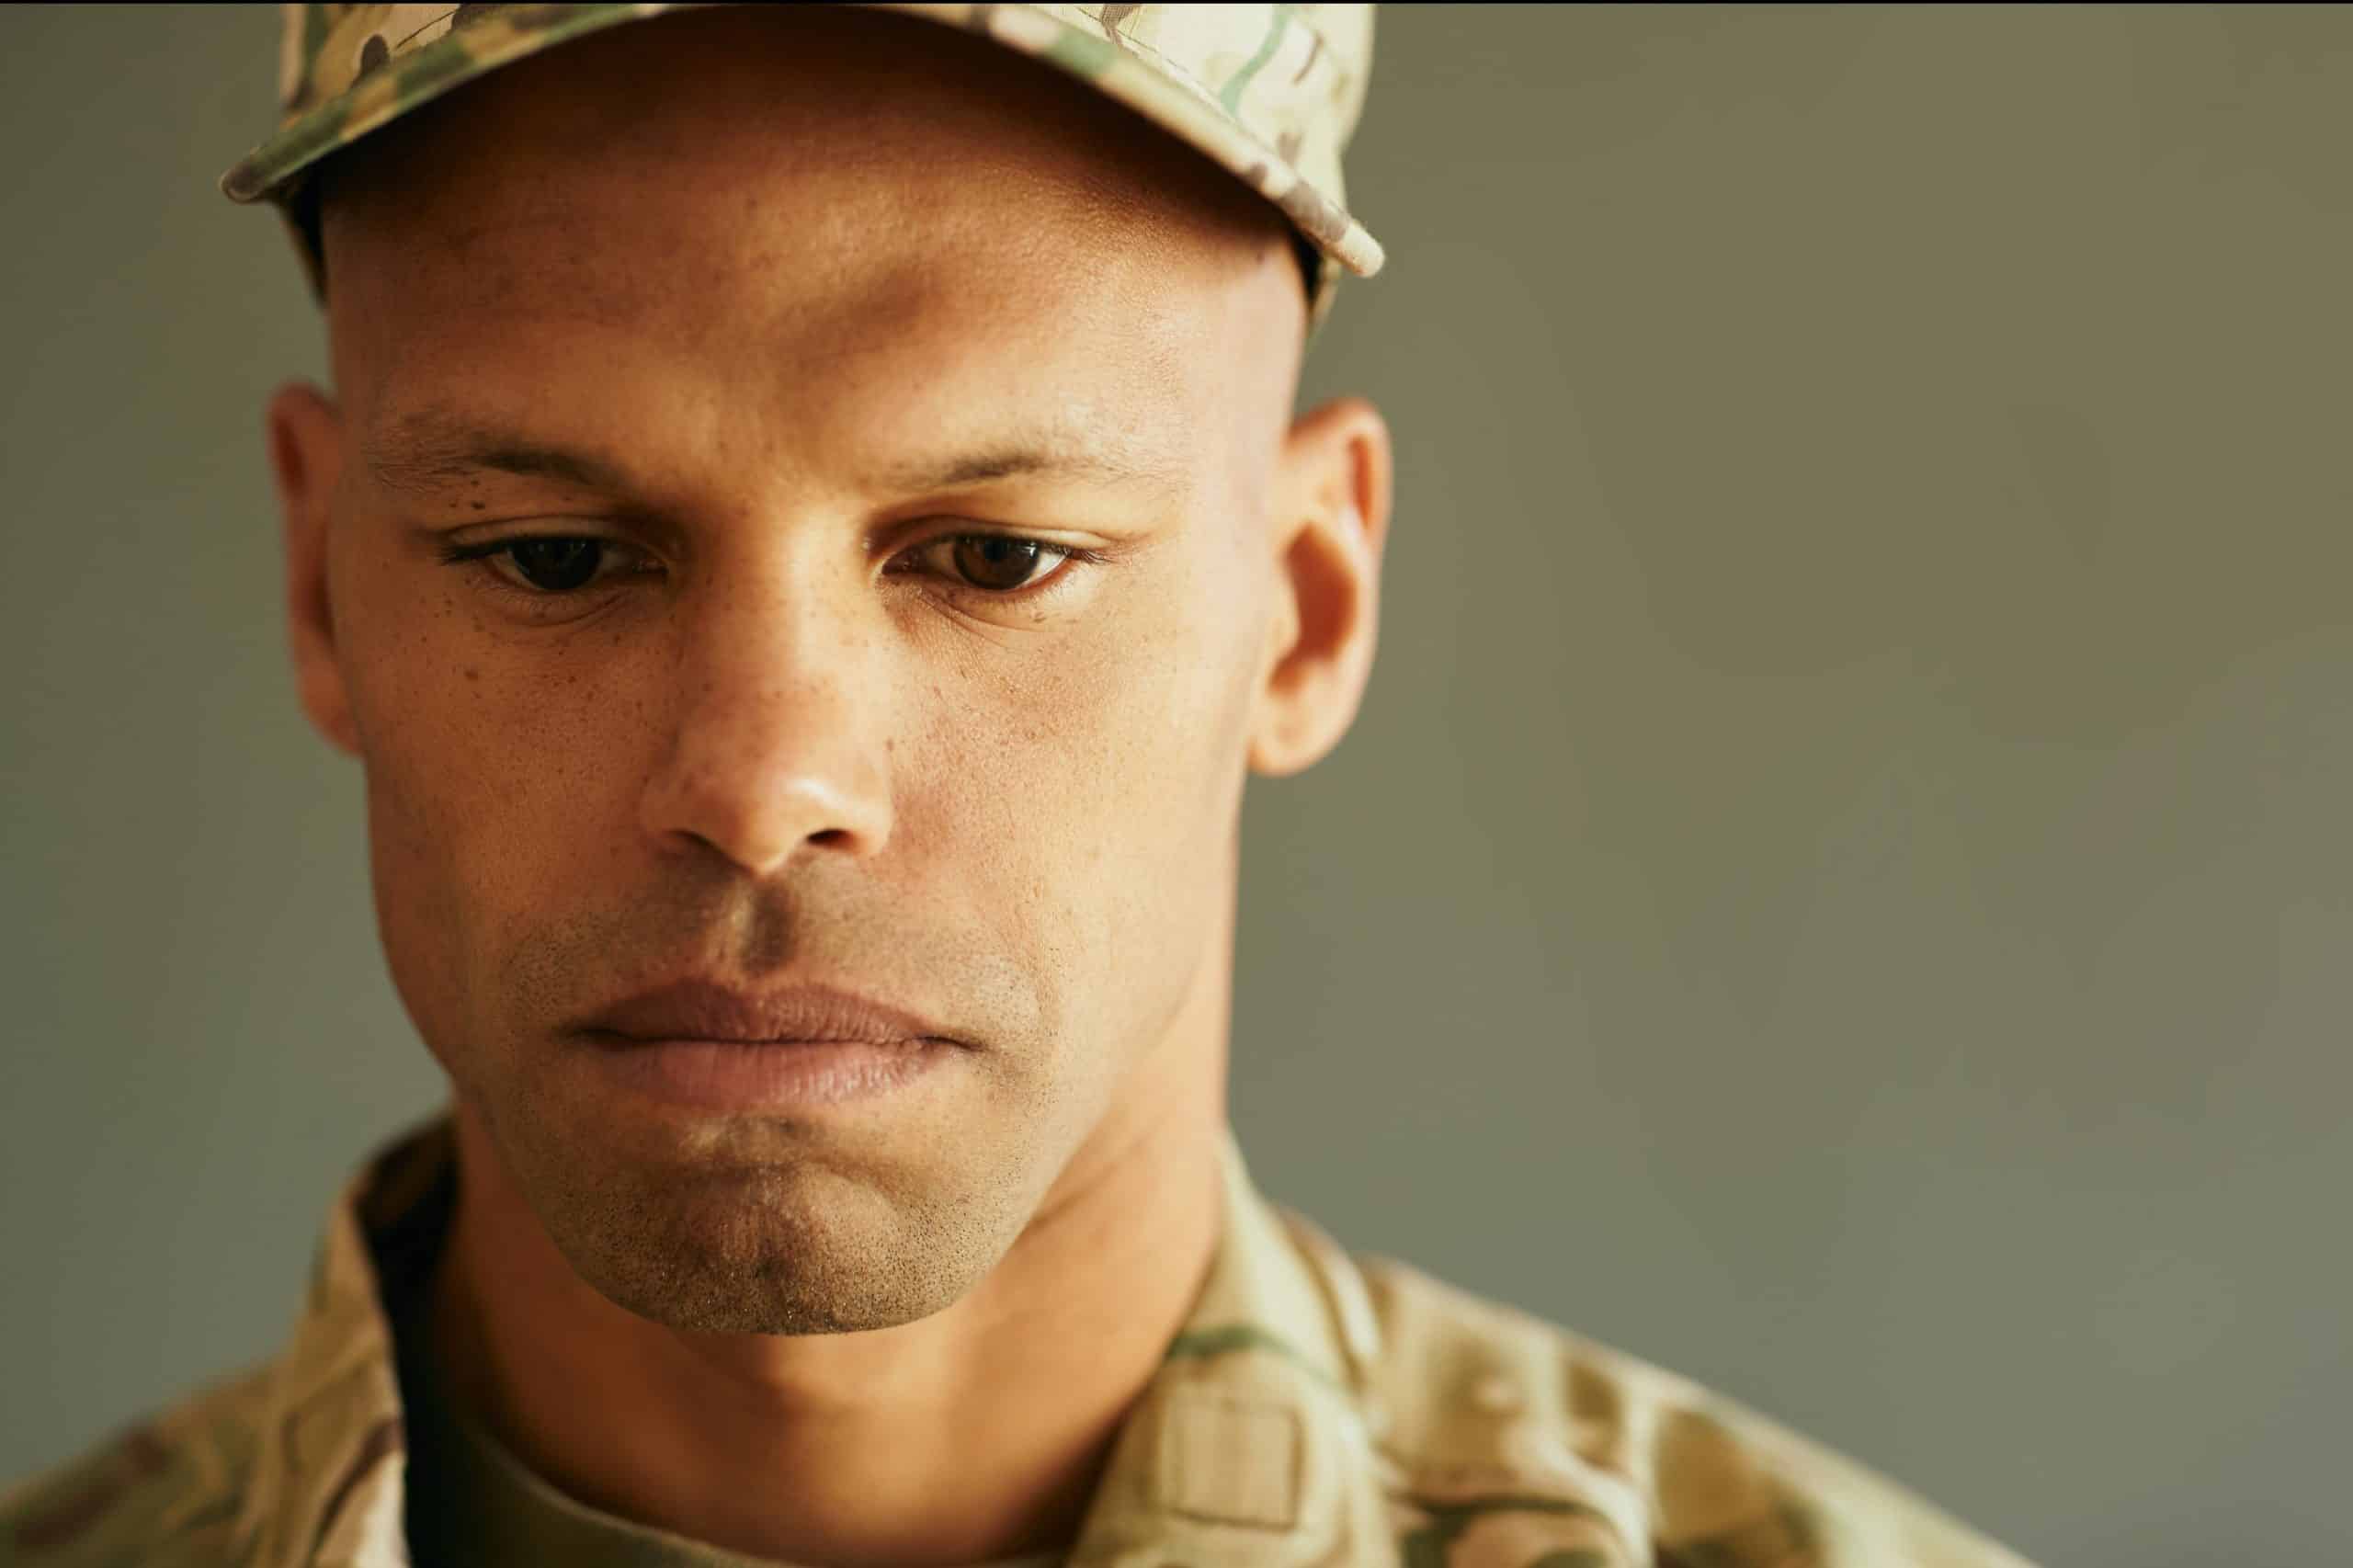  PTSD and Suicidal Ideation in Veterans